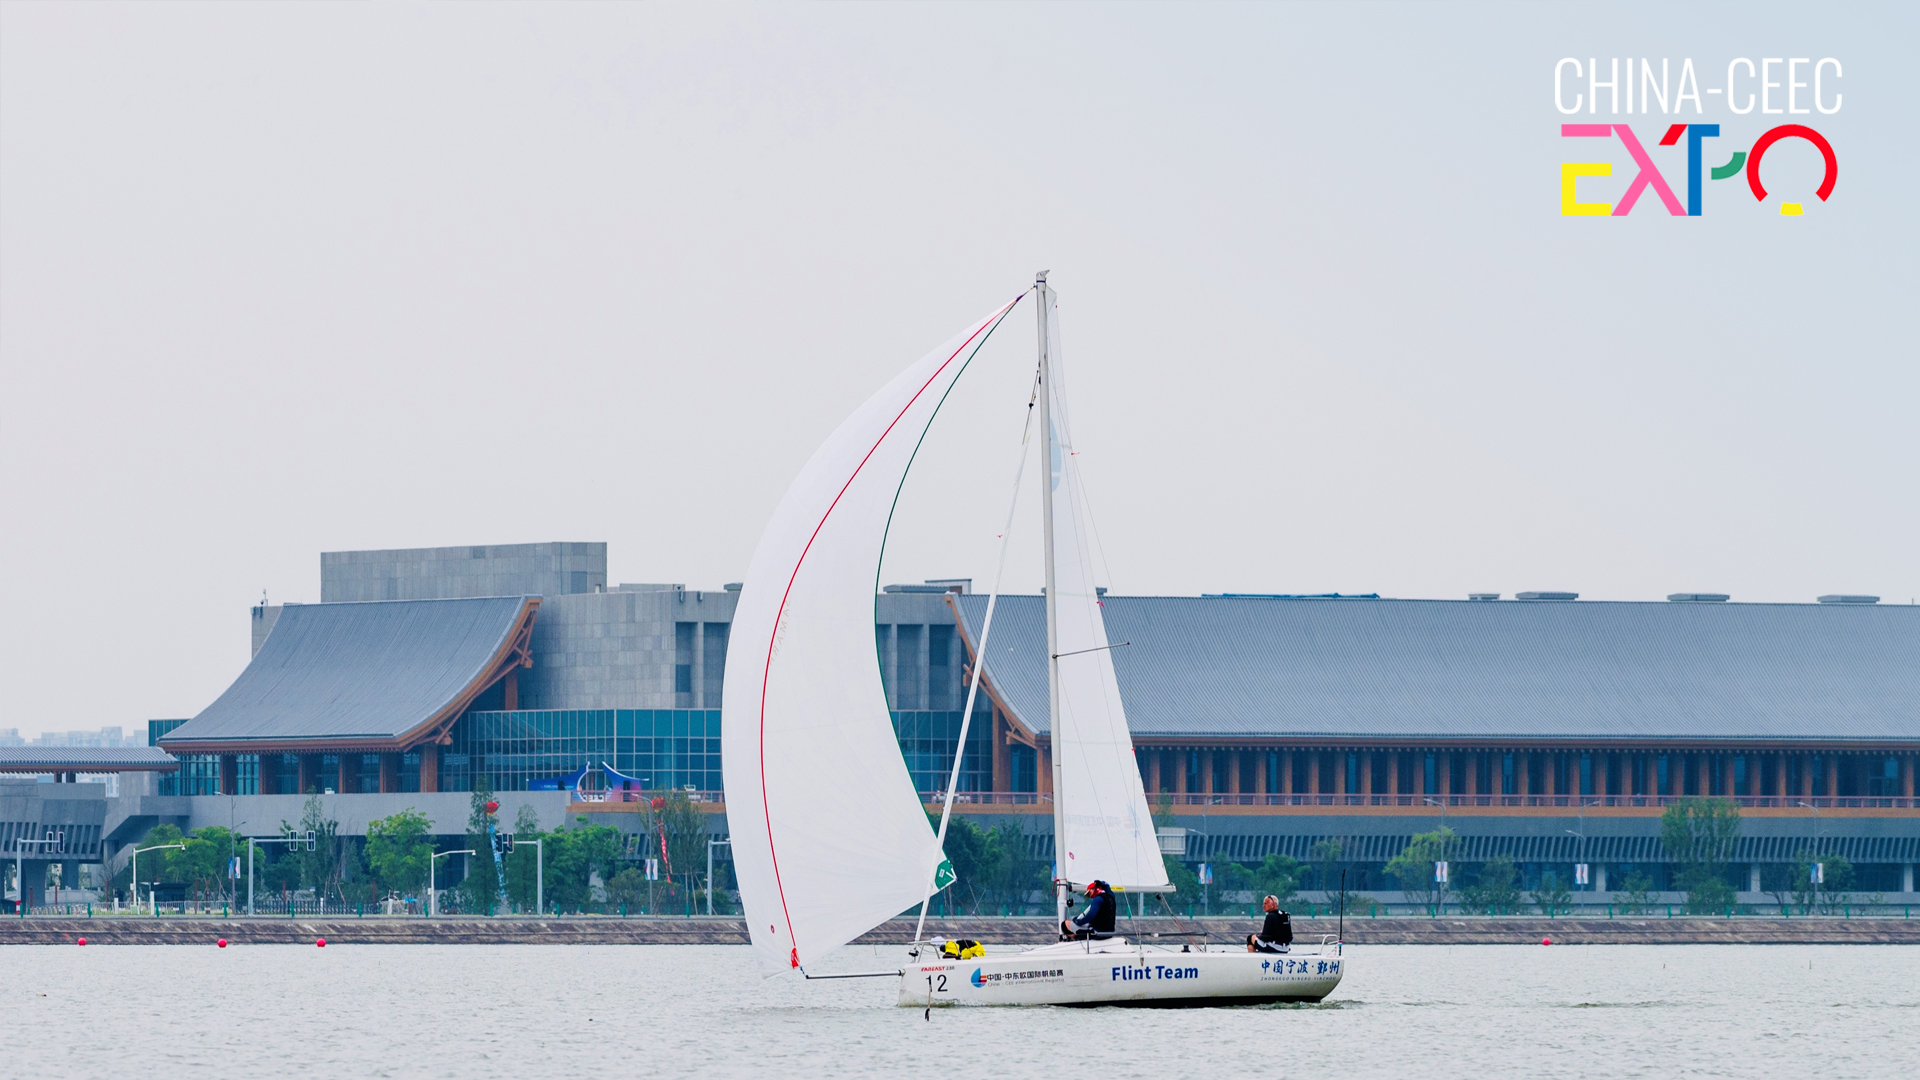 In pictures: The first China-Central and Eastern Europe International Regatta kicks off